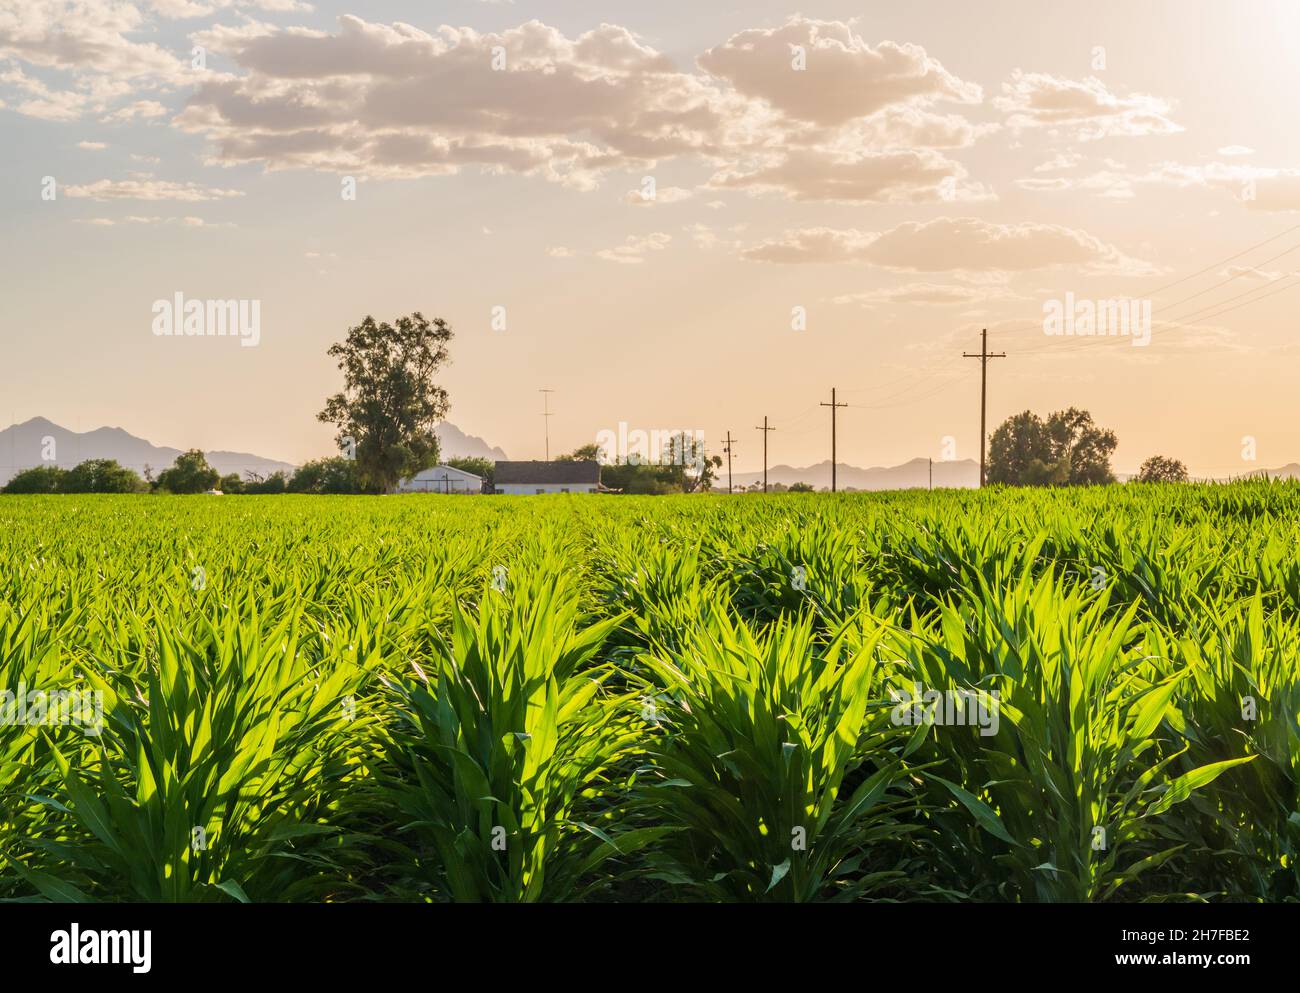 Rows of green corn plants on a farm in Arizona at sunset Stock Photo